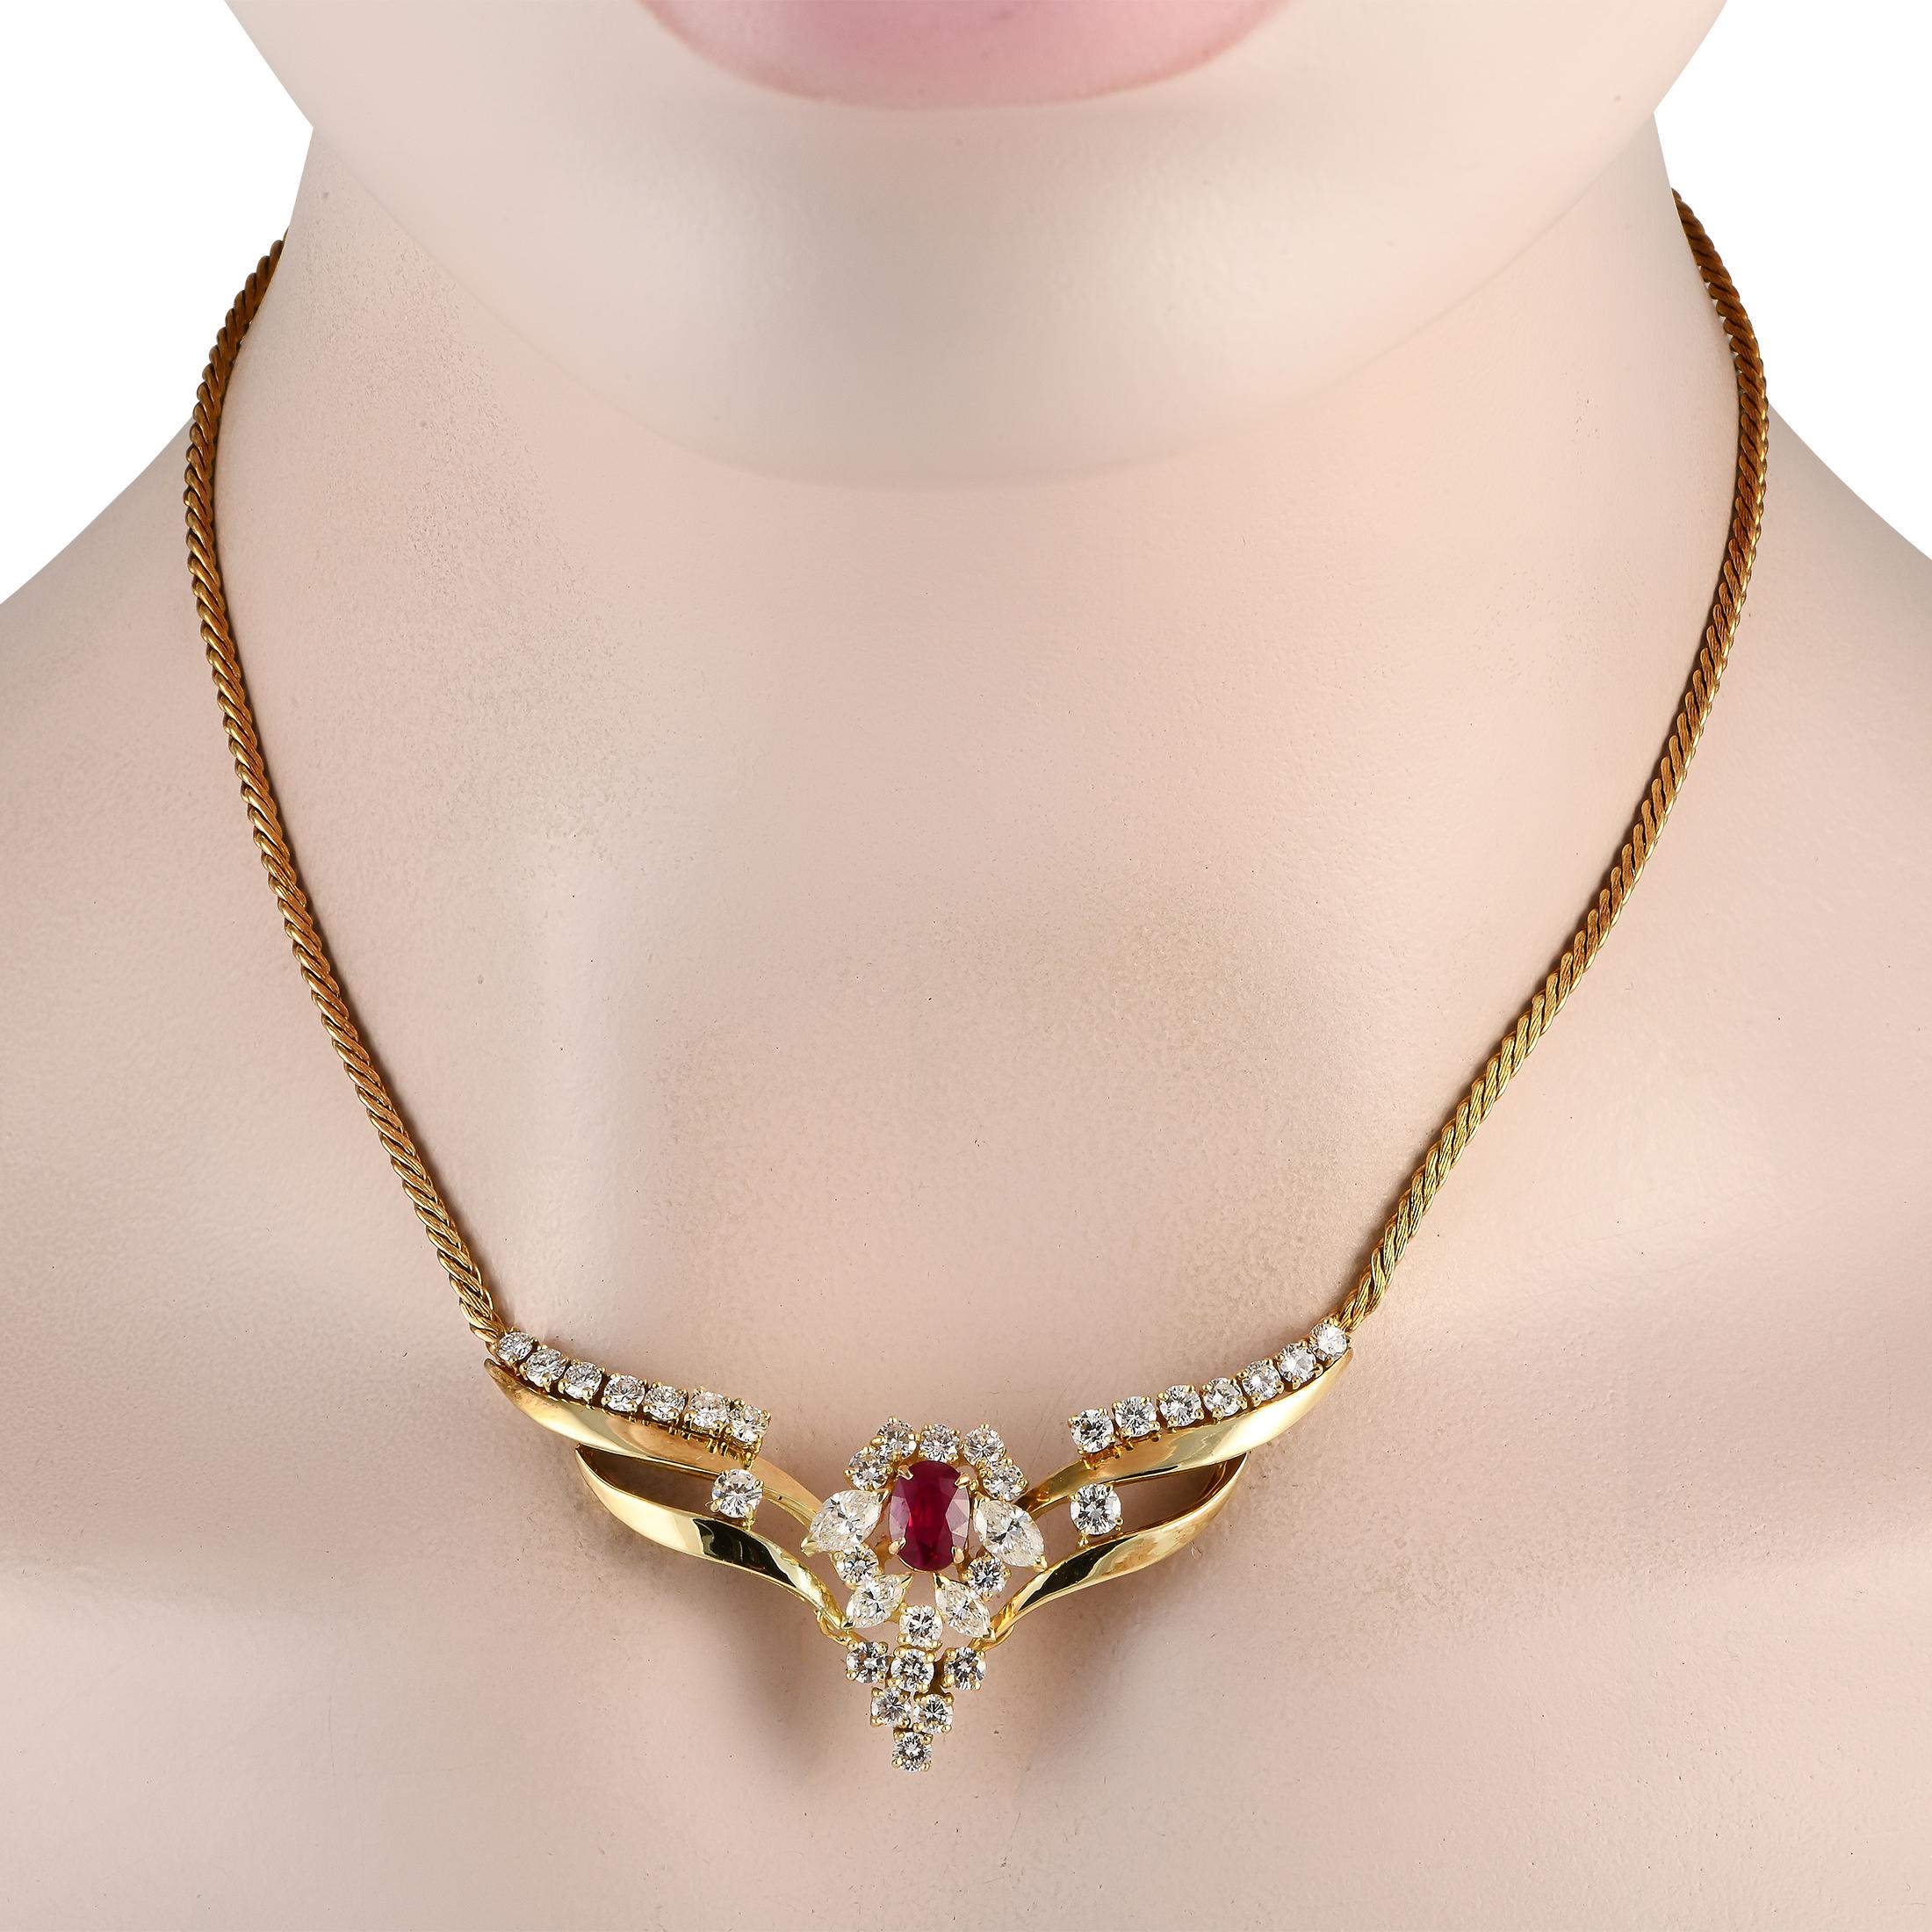 This exquisite necklace is poised to continually make a statement. At the center of the sleek 14.15 chain, youll find an intricate central pendant crafted from opulent 14K Yellow Gold. Diamond accents with a total weight of 4.0 carats provide plenty